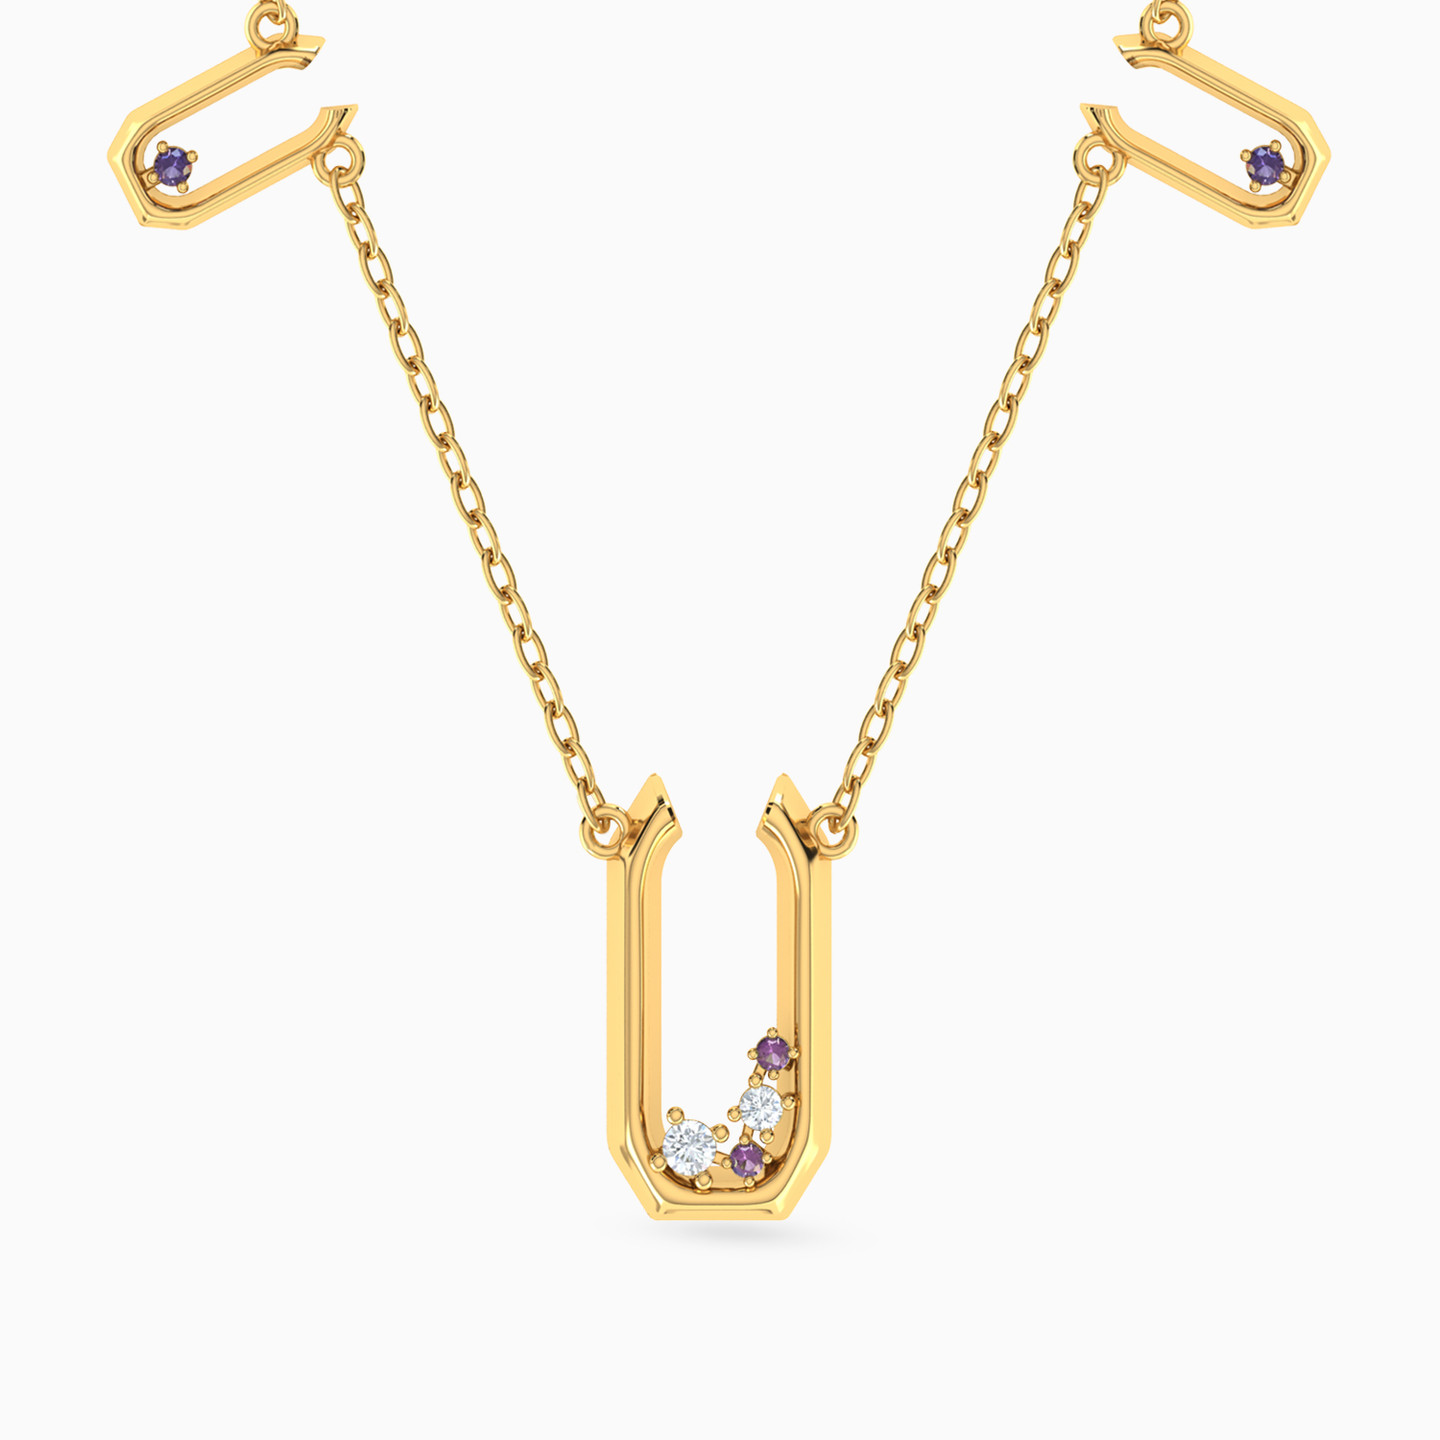 U Shaped Colored Stones Pendant with 18K Gold Chain